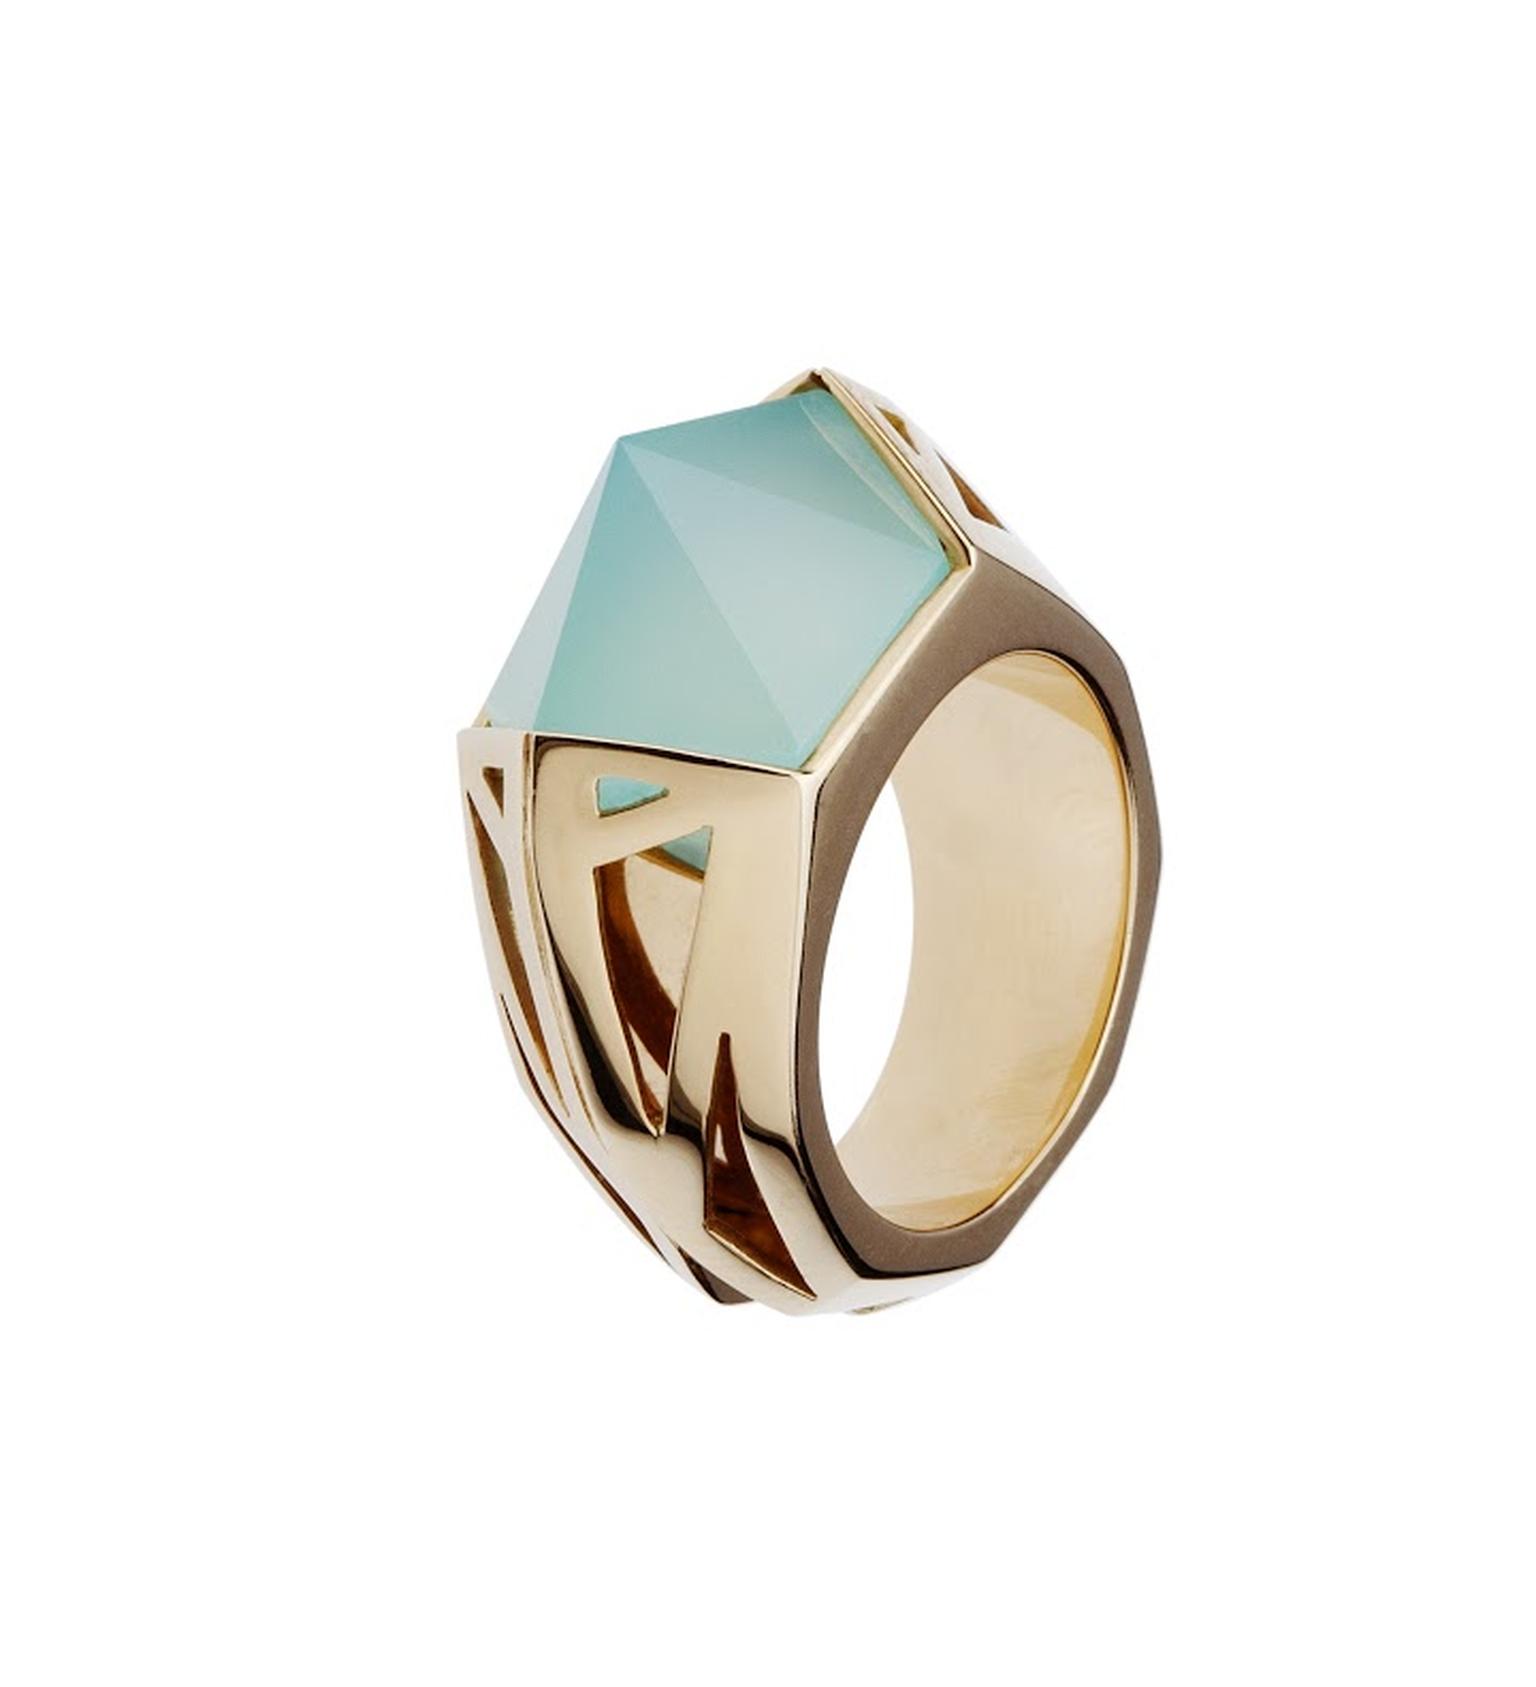 Mimata pink gold and chalcedony ring, from the Moon collection.